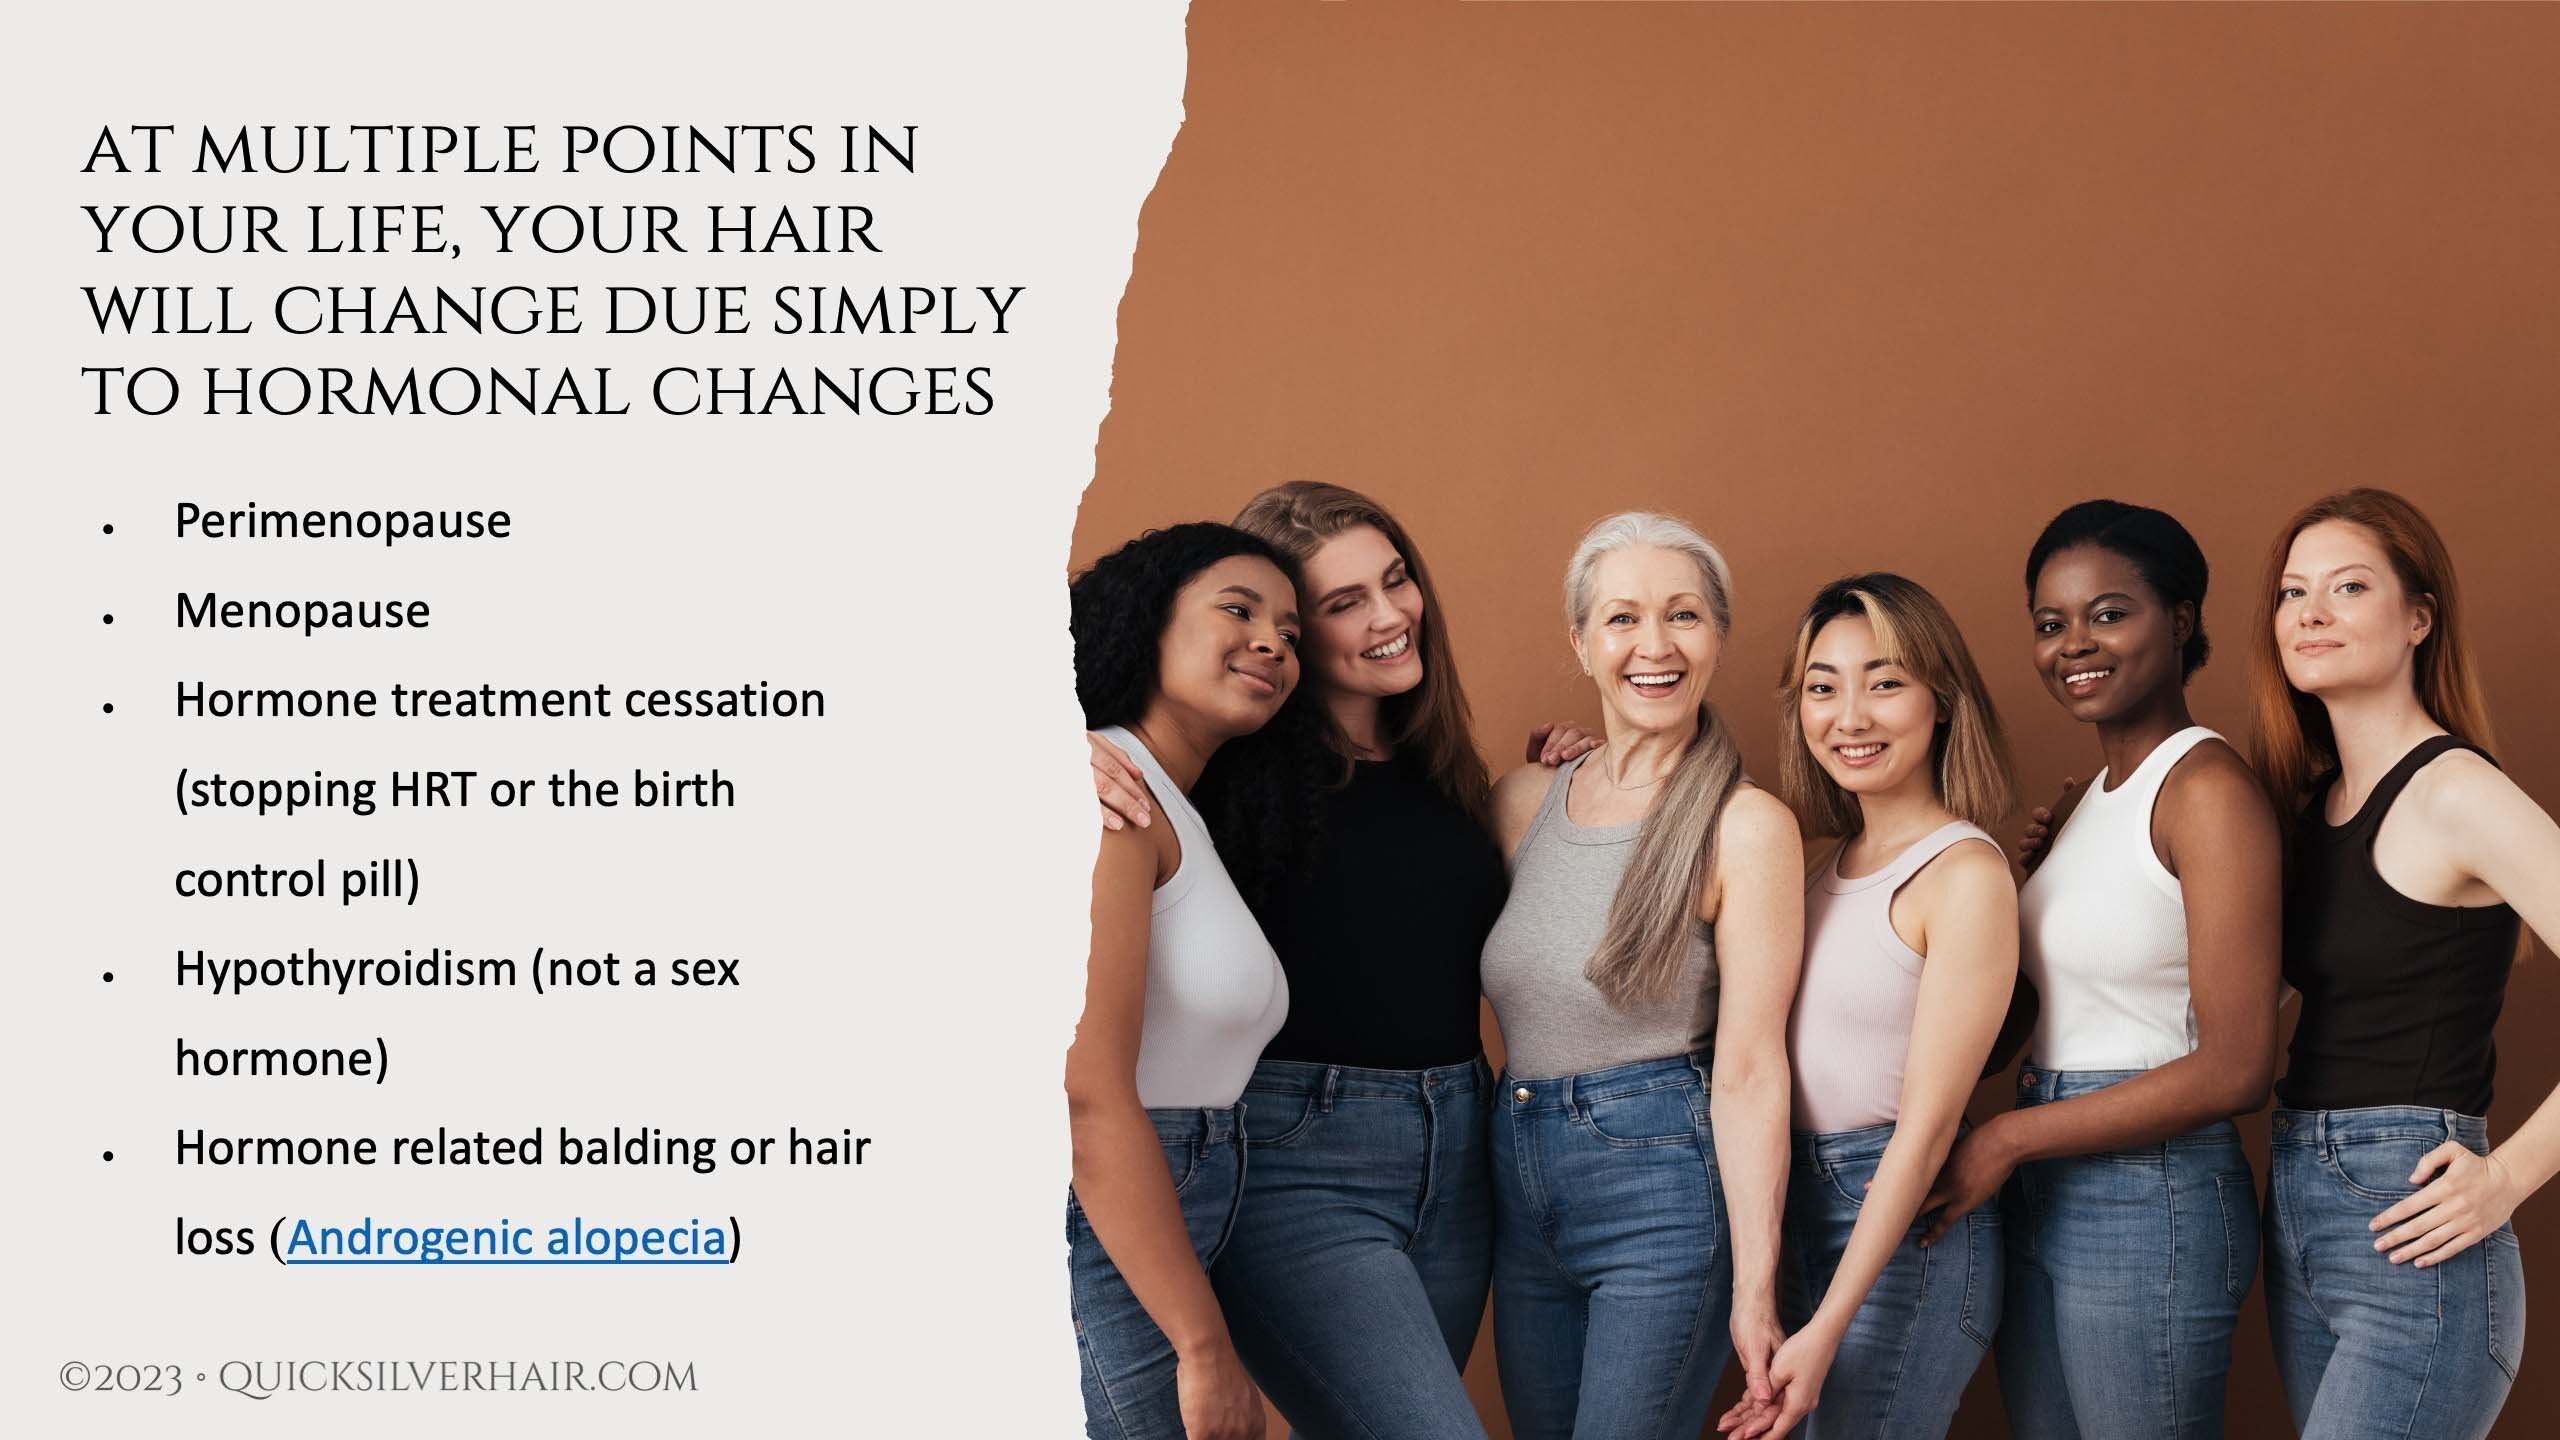 Graphic about At multiple points in your life, your hair will change due simply to hormonal changes.